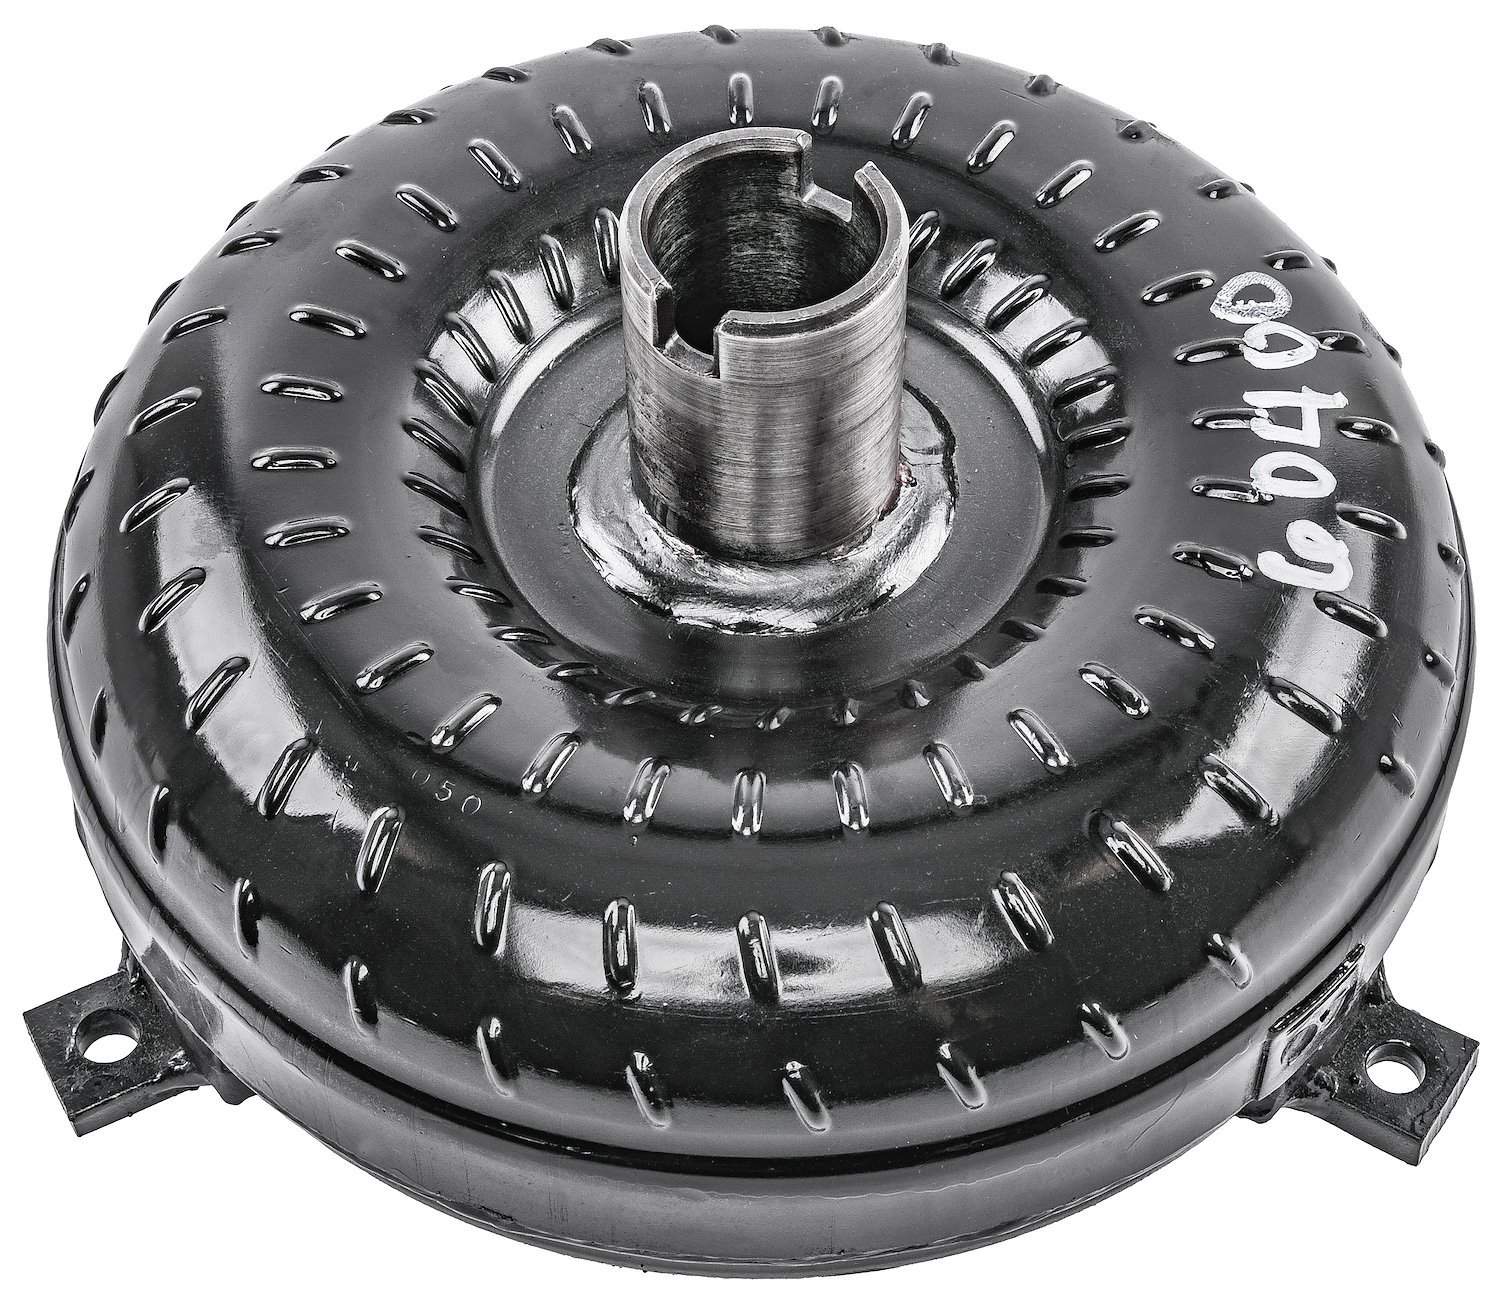 Torque Converter for GM TH350/TH400 [2300-2700 RPM Stall